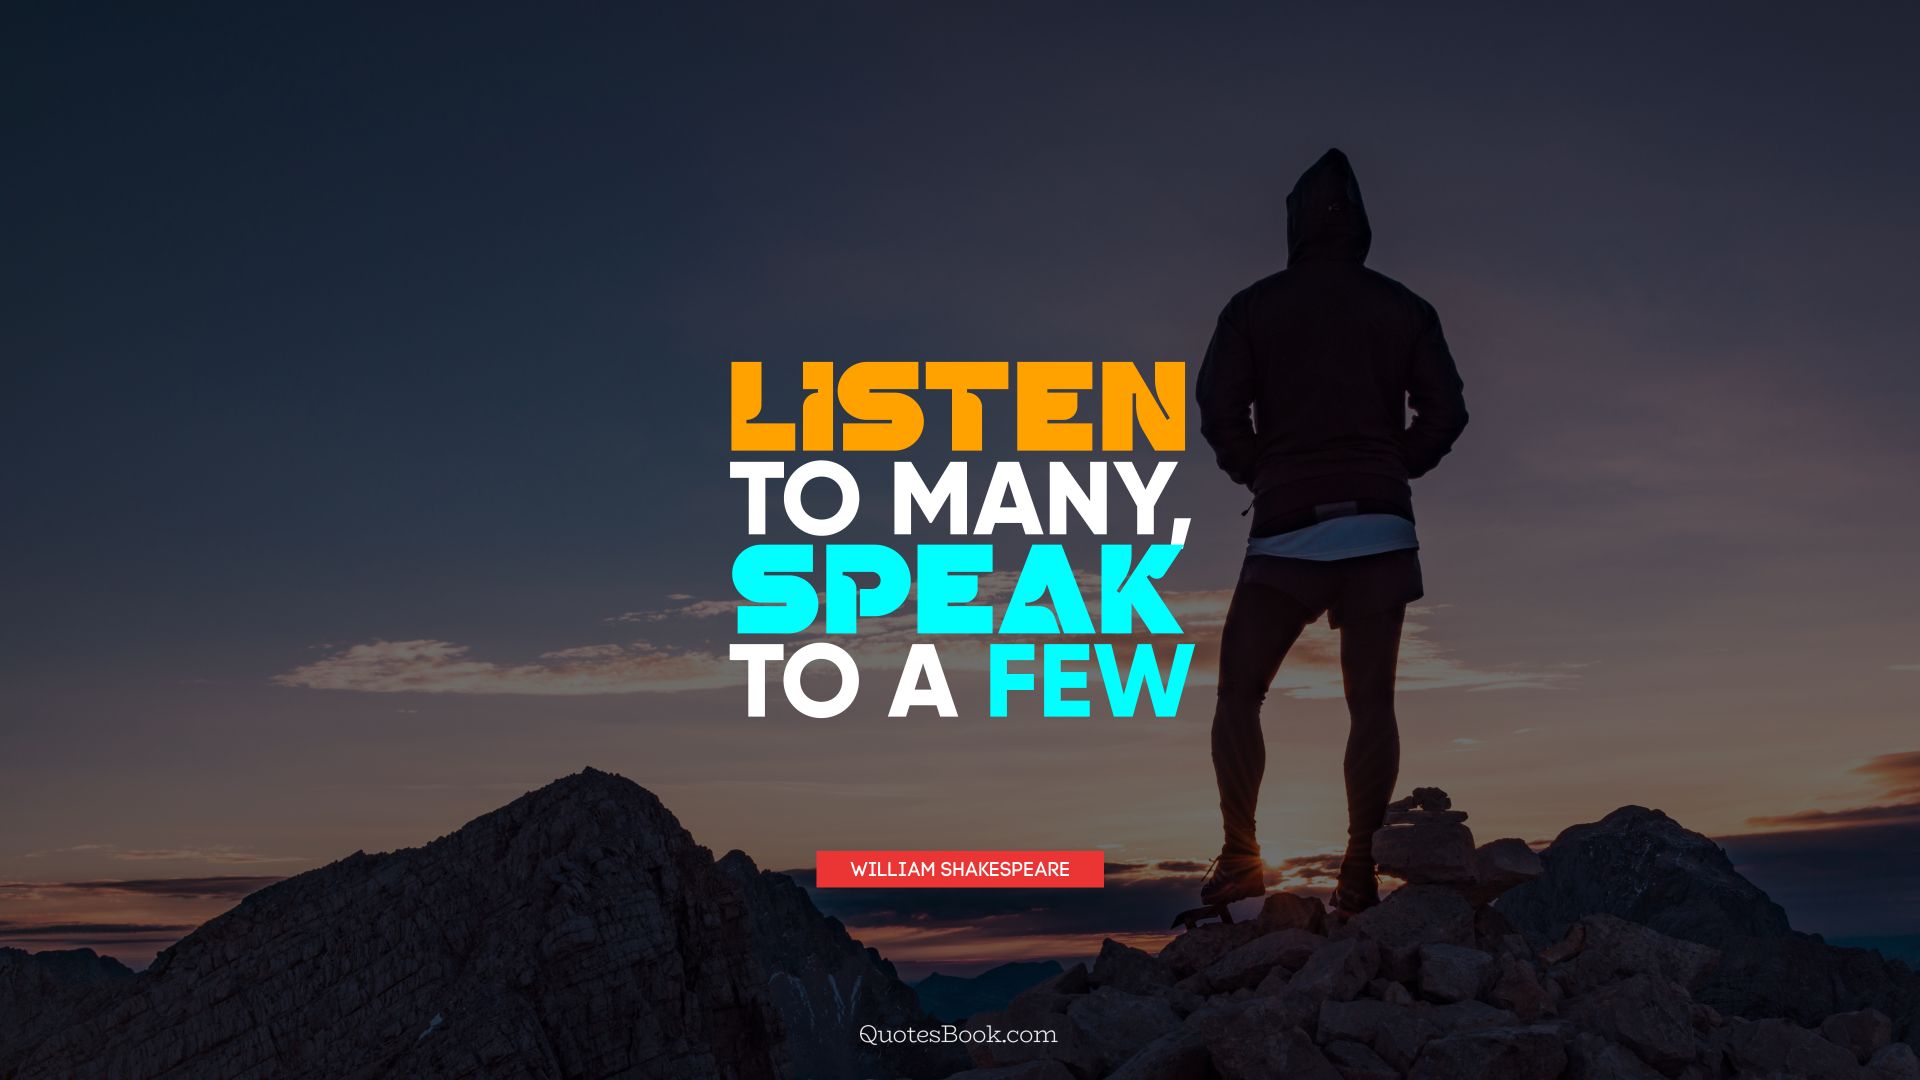 Listen to many, speak to a few. - Quote by William Shakespeare